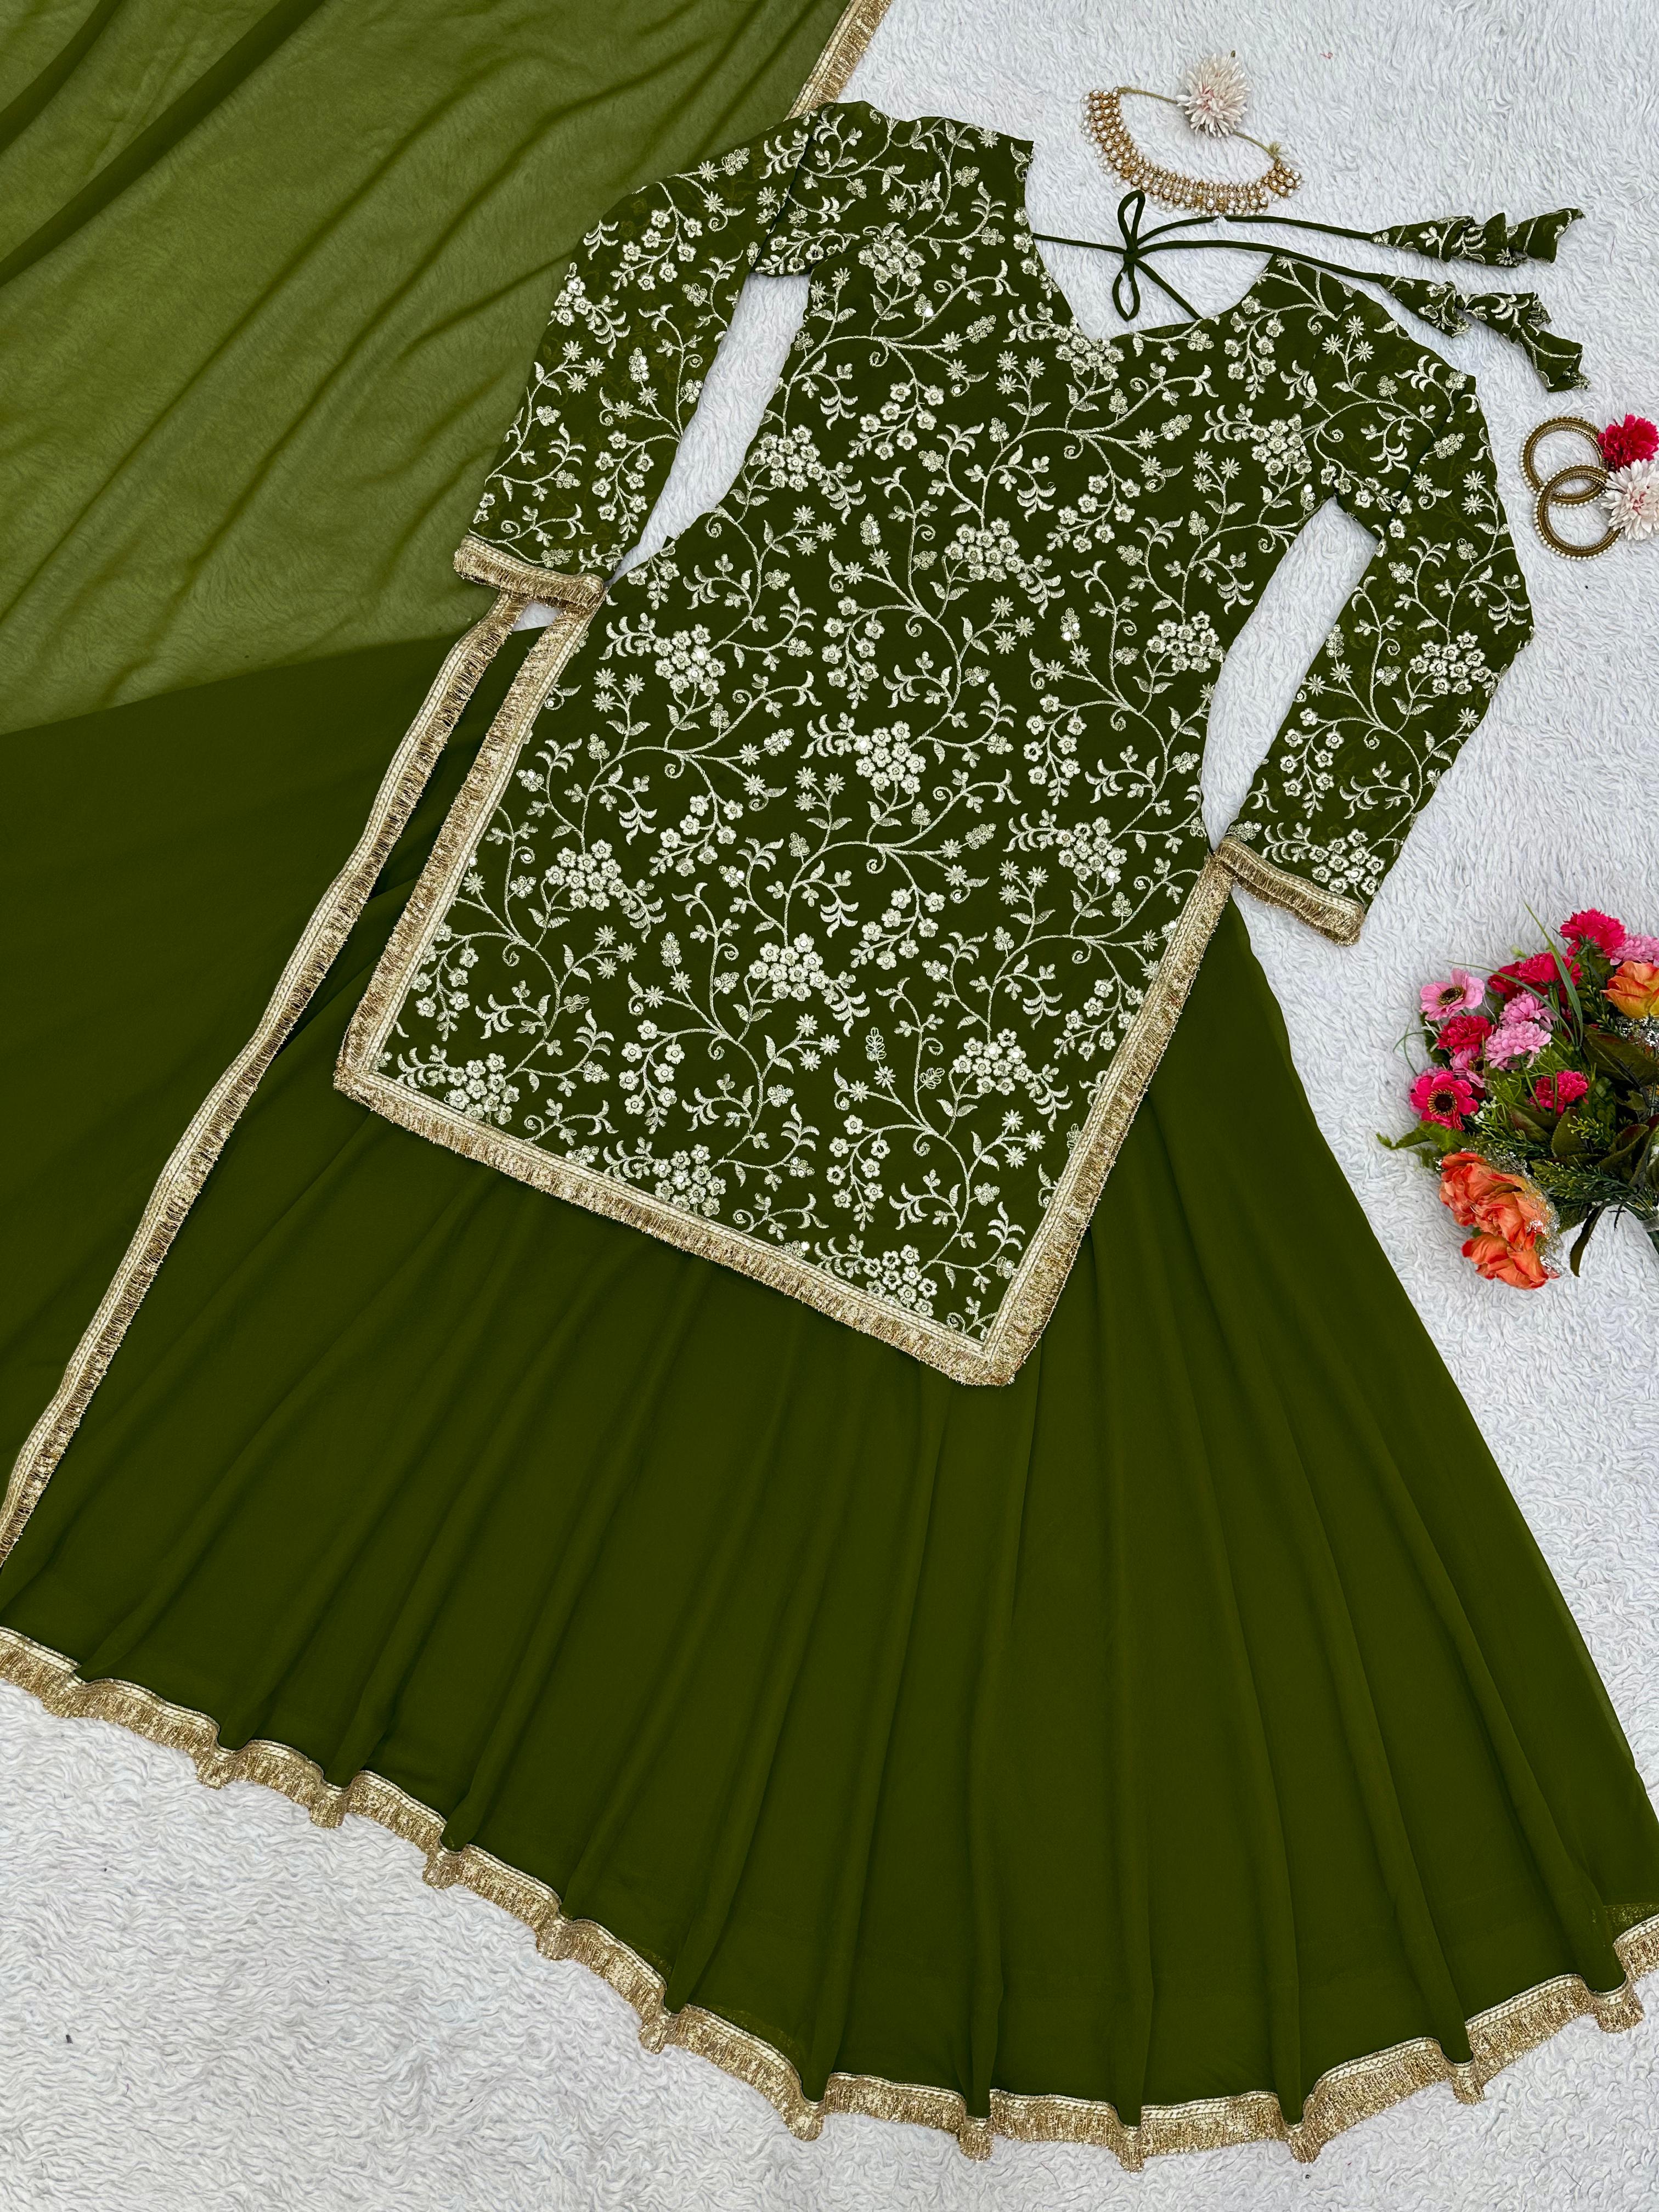 Vibrant Lime Green Outfits For Brides To Rock At Their Mehendi |  WeddingBazaar